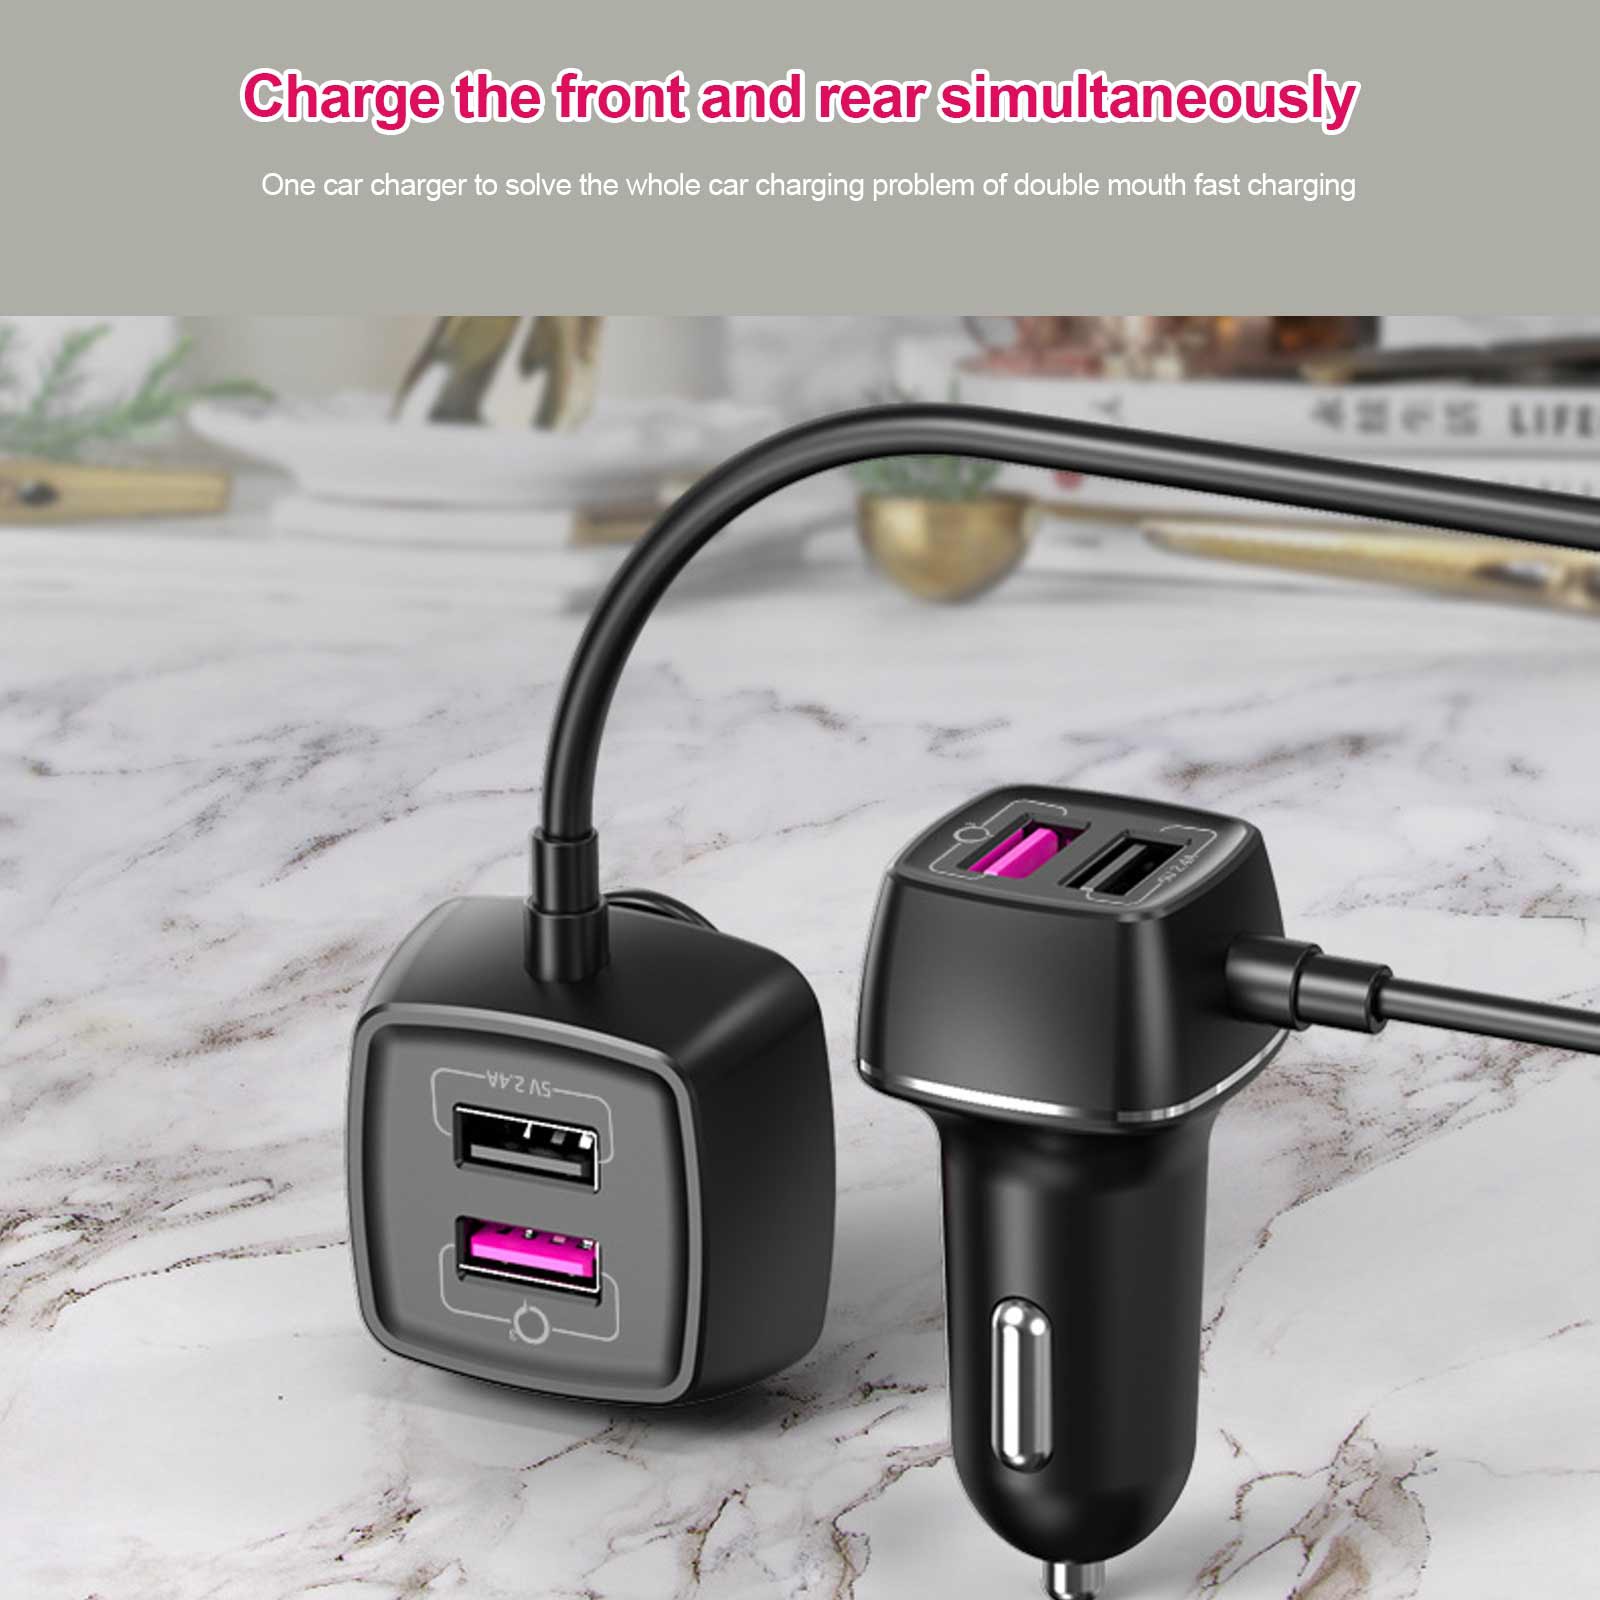 IN STOCK Car Charger Four USB Interfaces Compact Practical Car Charging Device